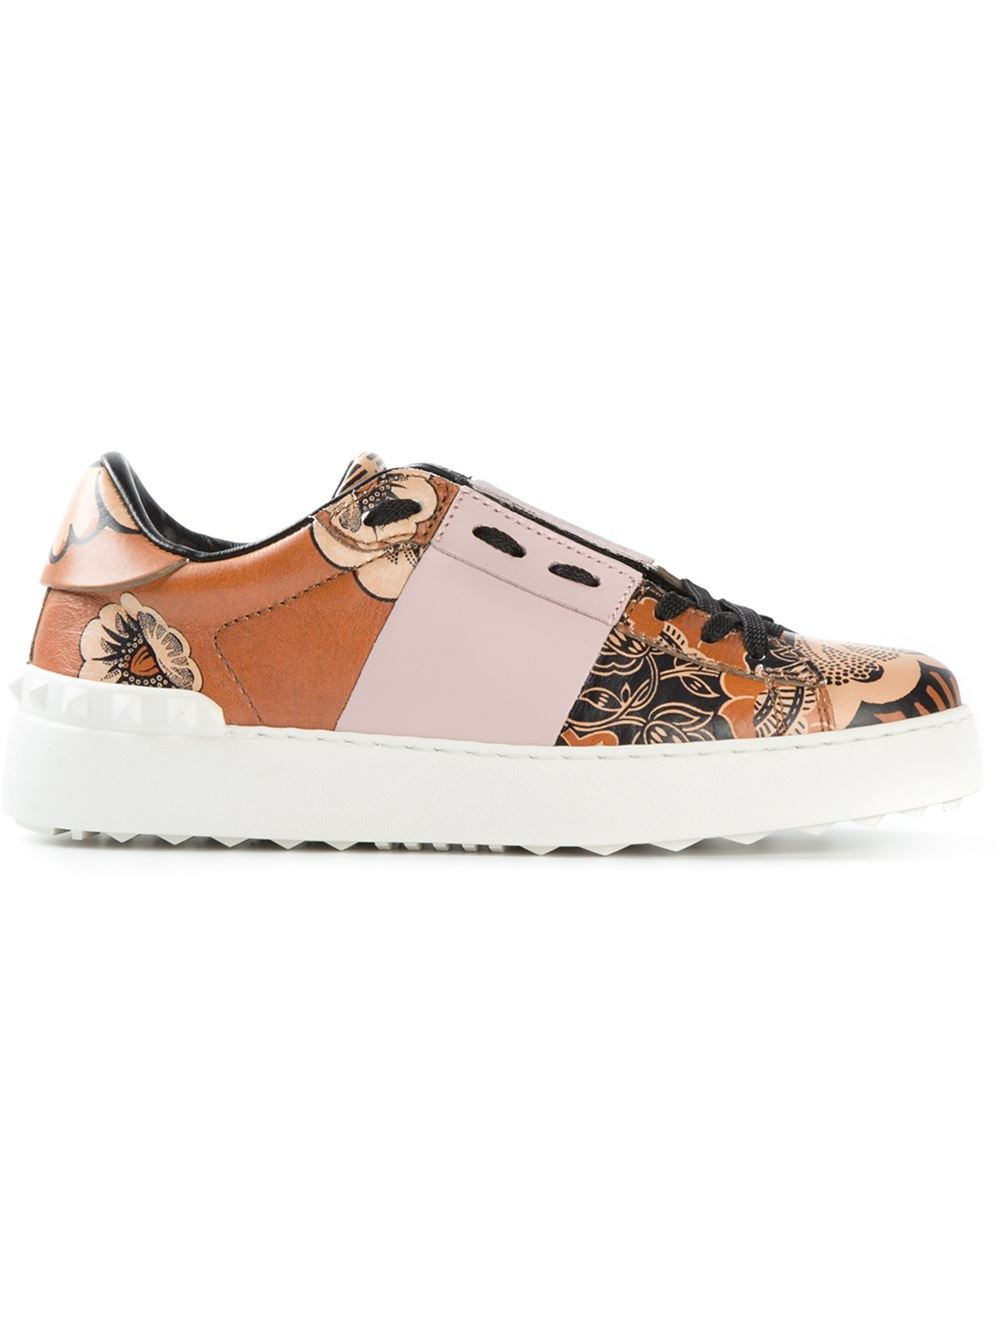 Valentino 'Open' Floral Print Sneakers - Lyst